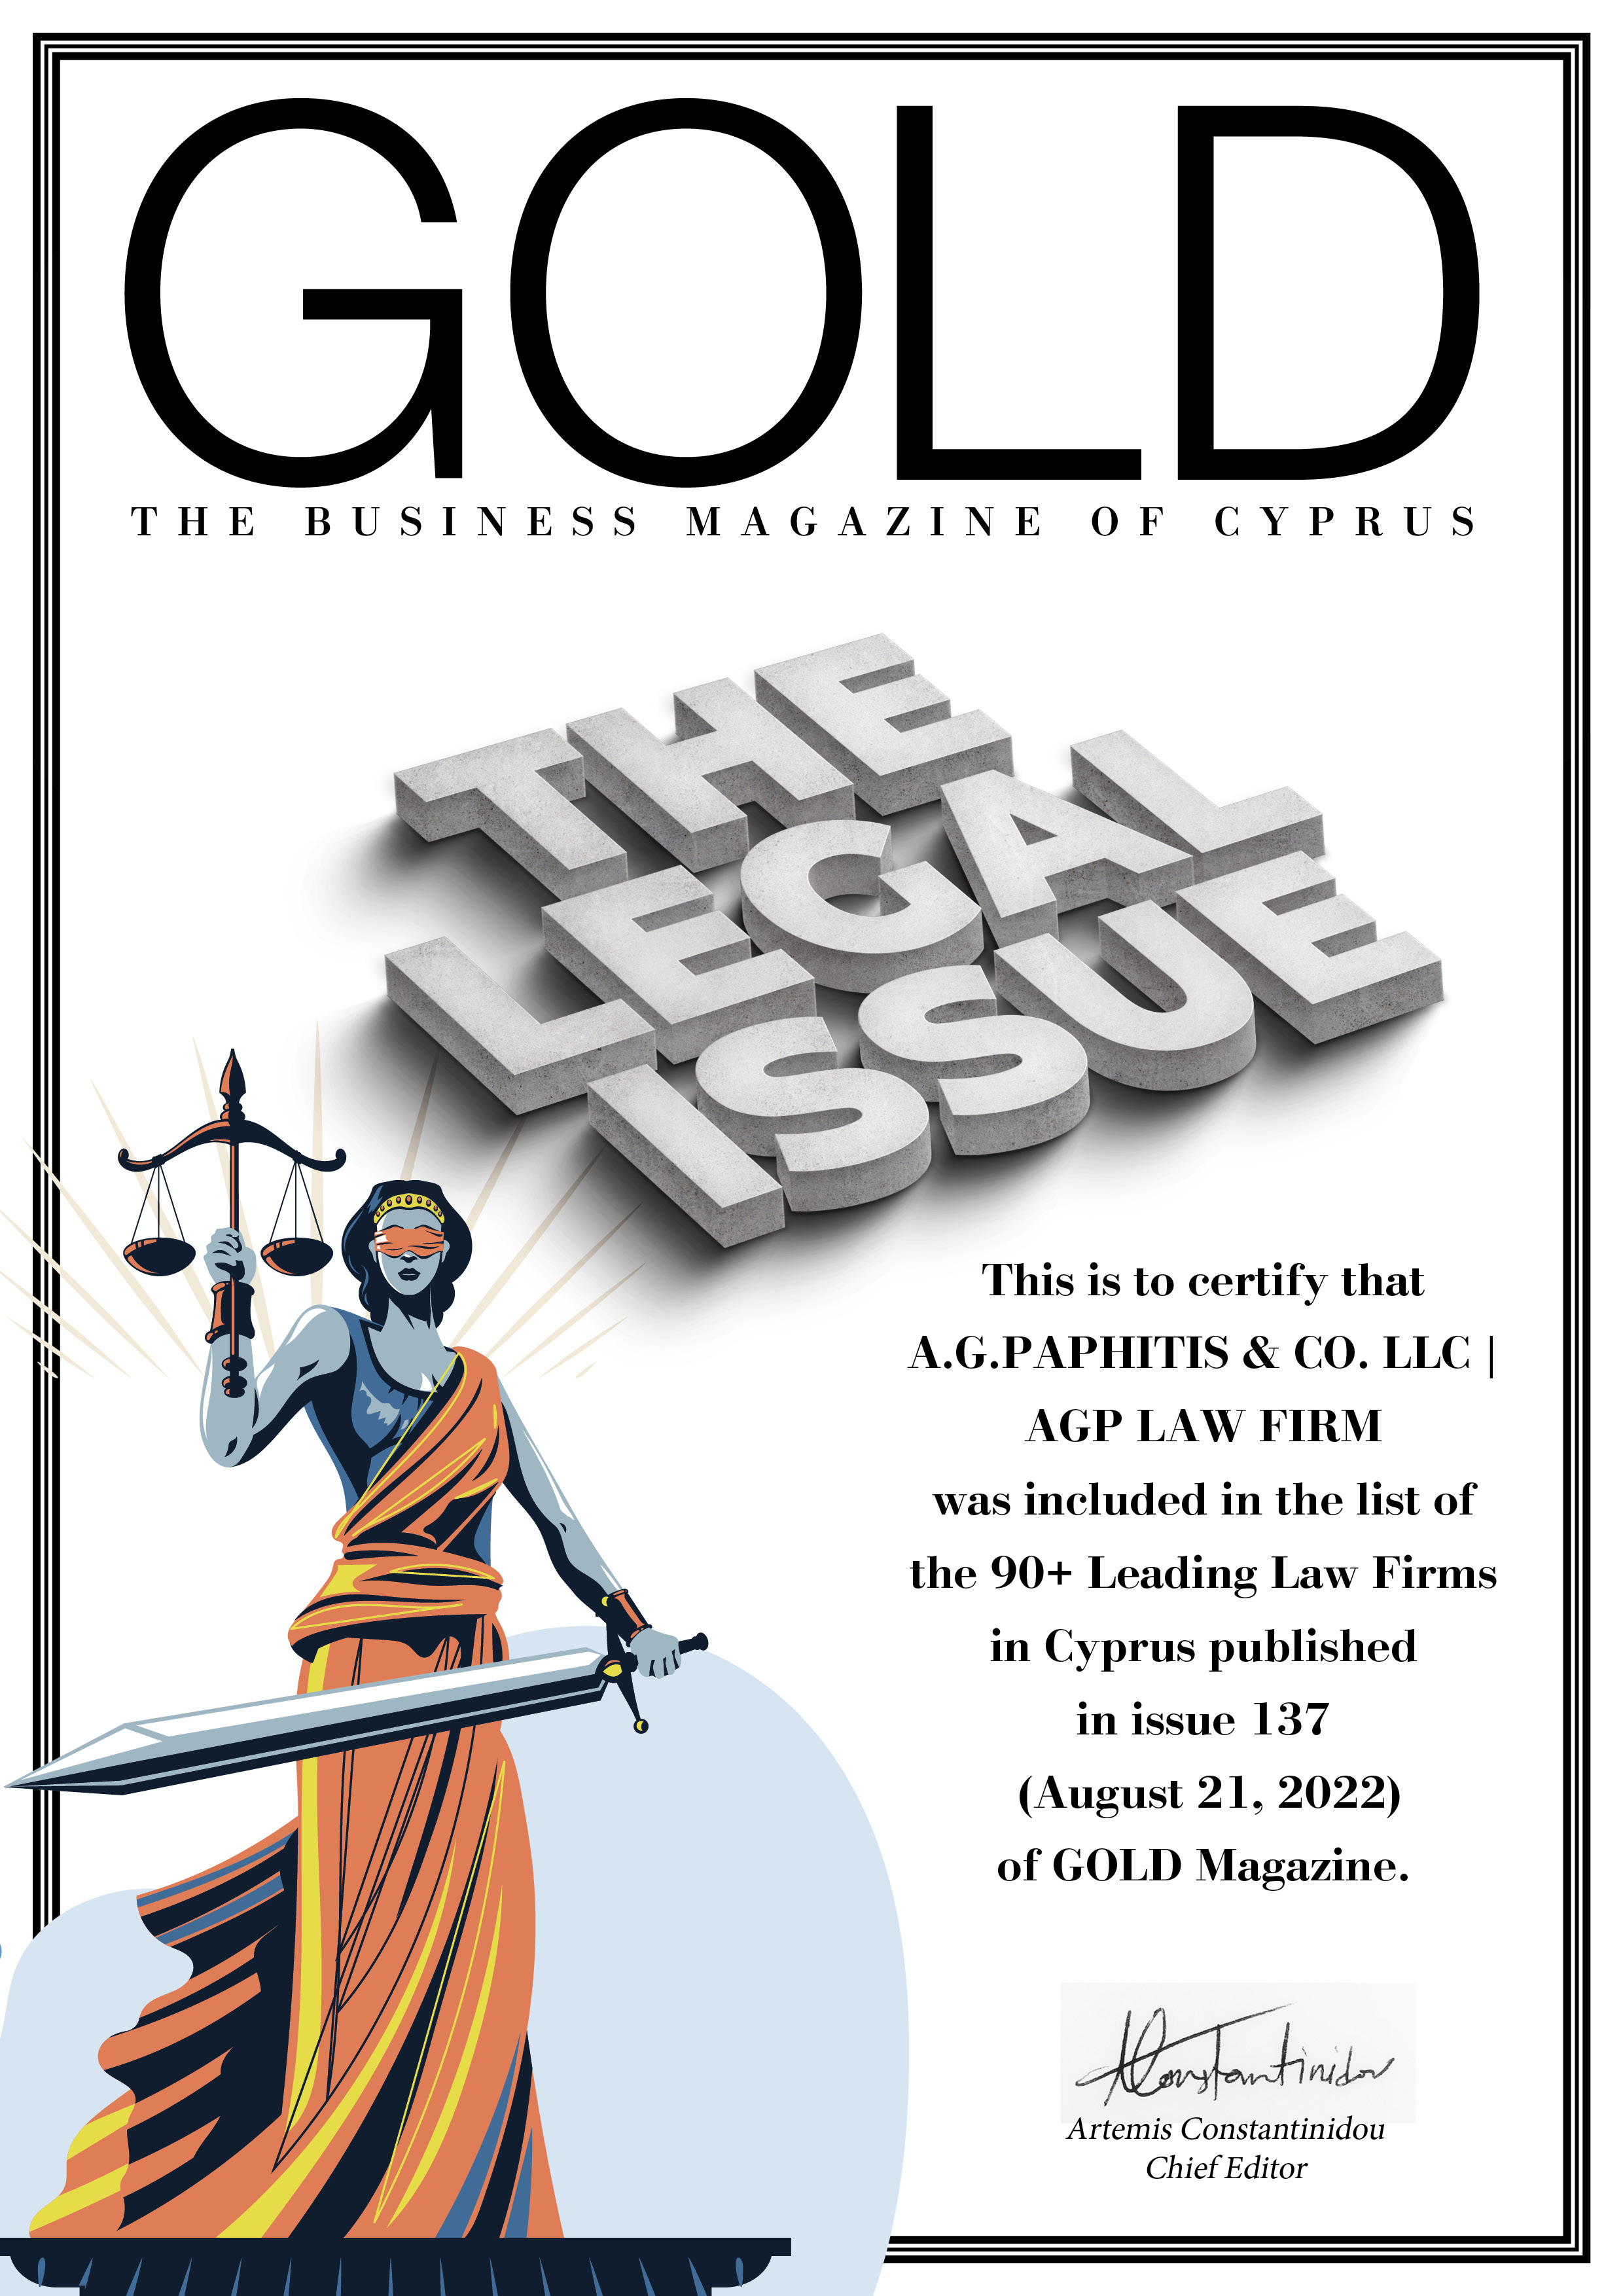 Gold Magazine 2022 Top 90+ Law Firms in Cyprus